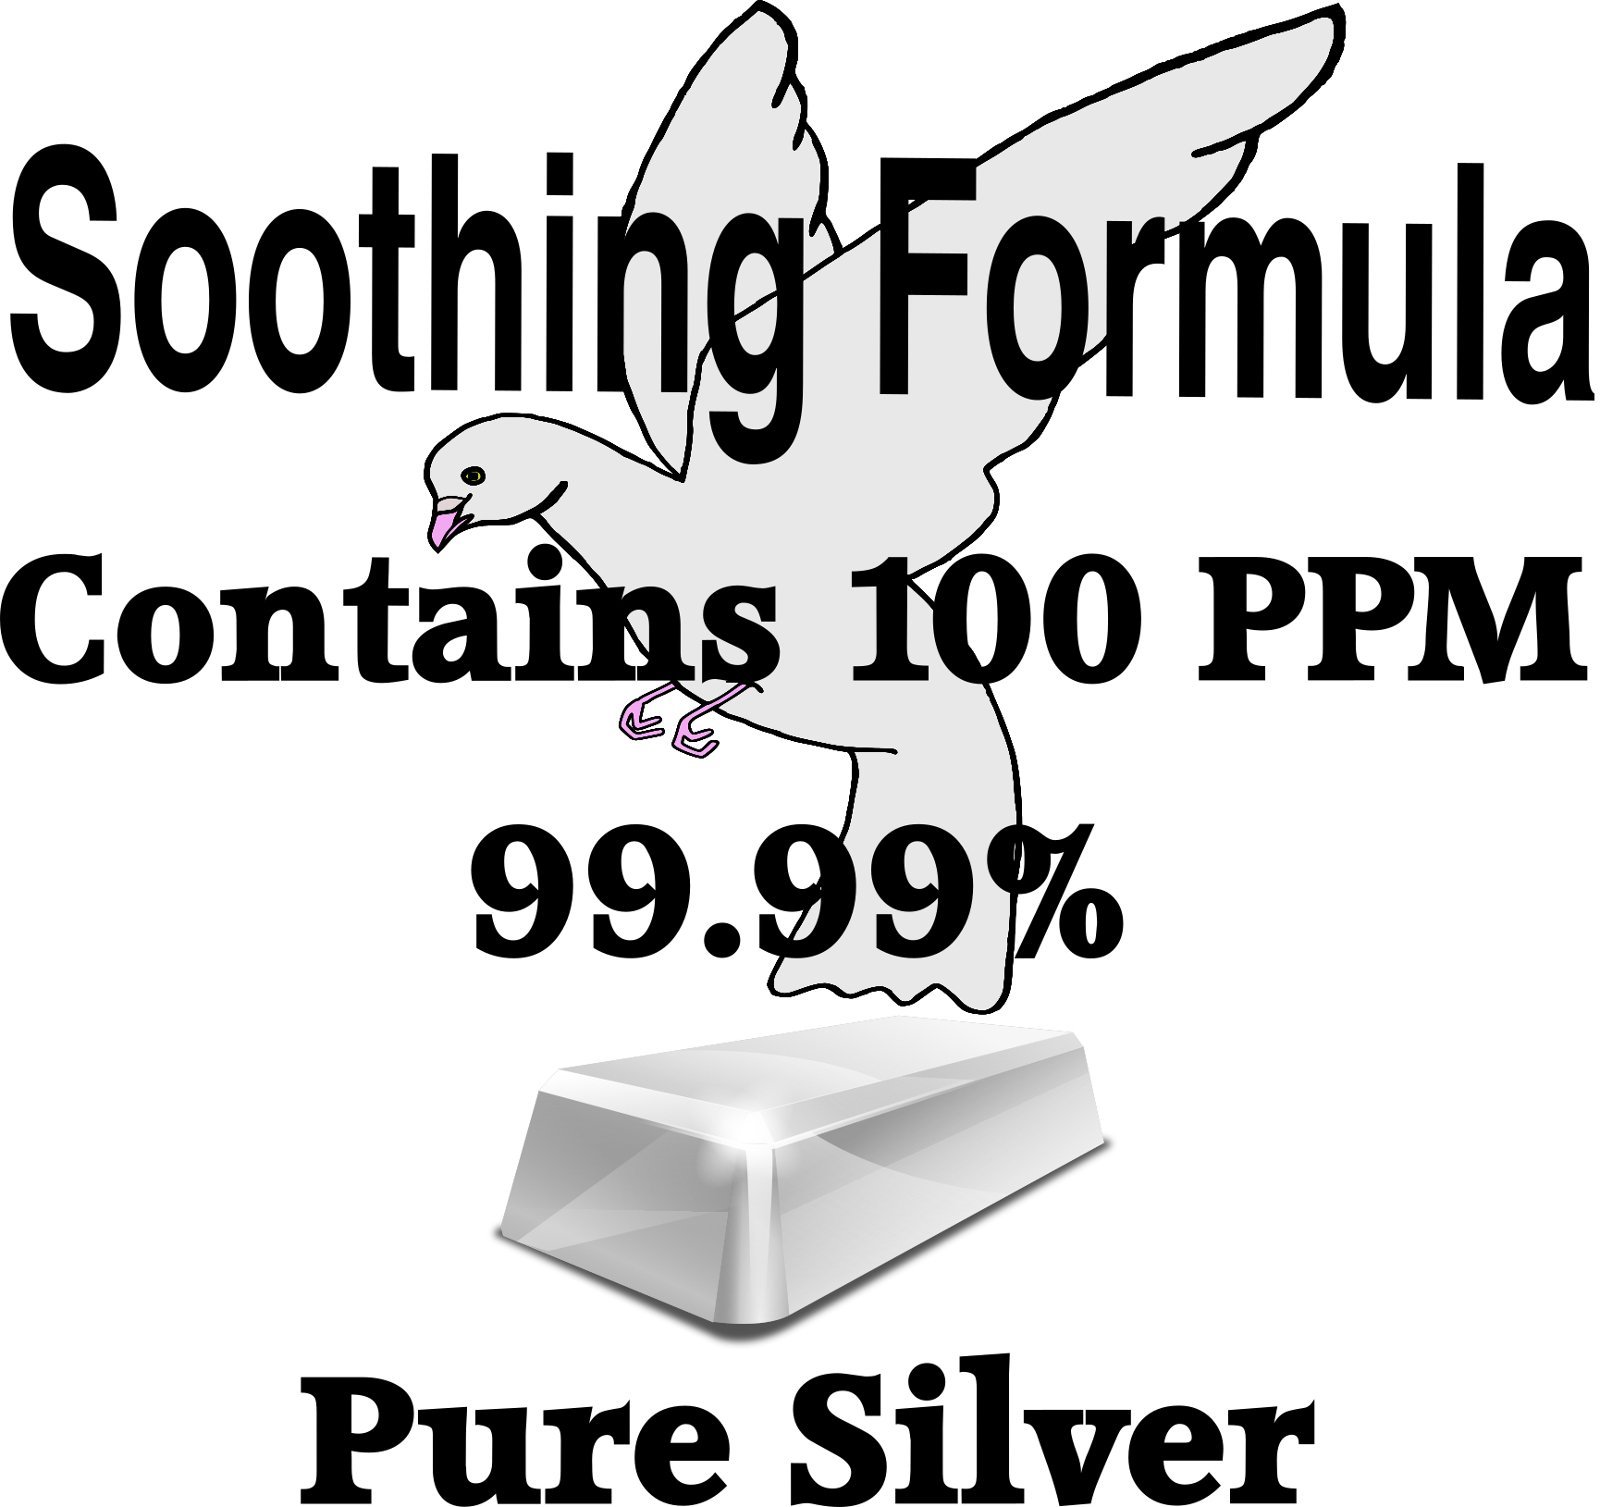 Superior Colloidal Silver Gel Big 4 oz. Jar Made with Organic Aloe Vera, 100 PPM 99.99% Pure Silver, & Simple Safe Ingredients